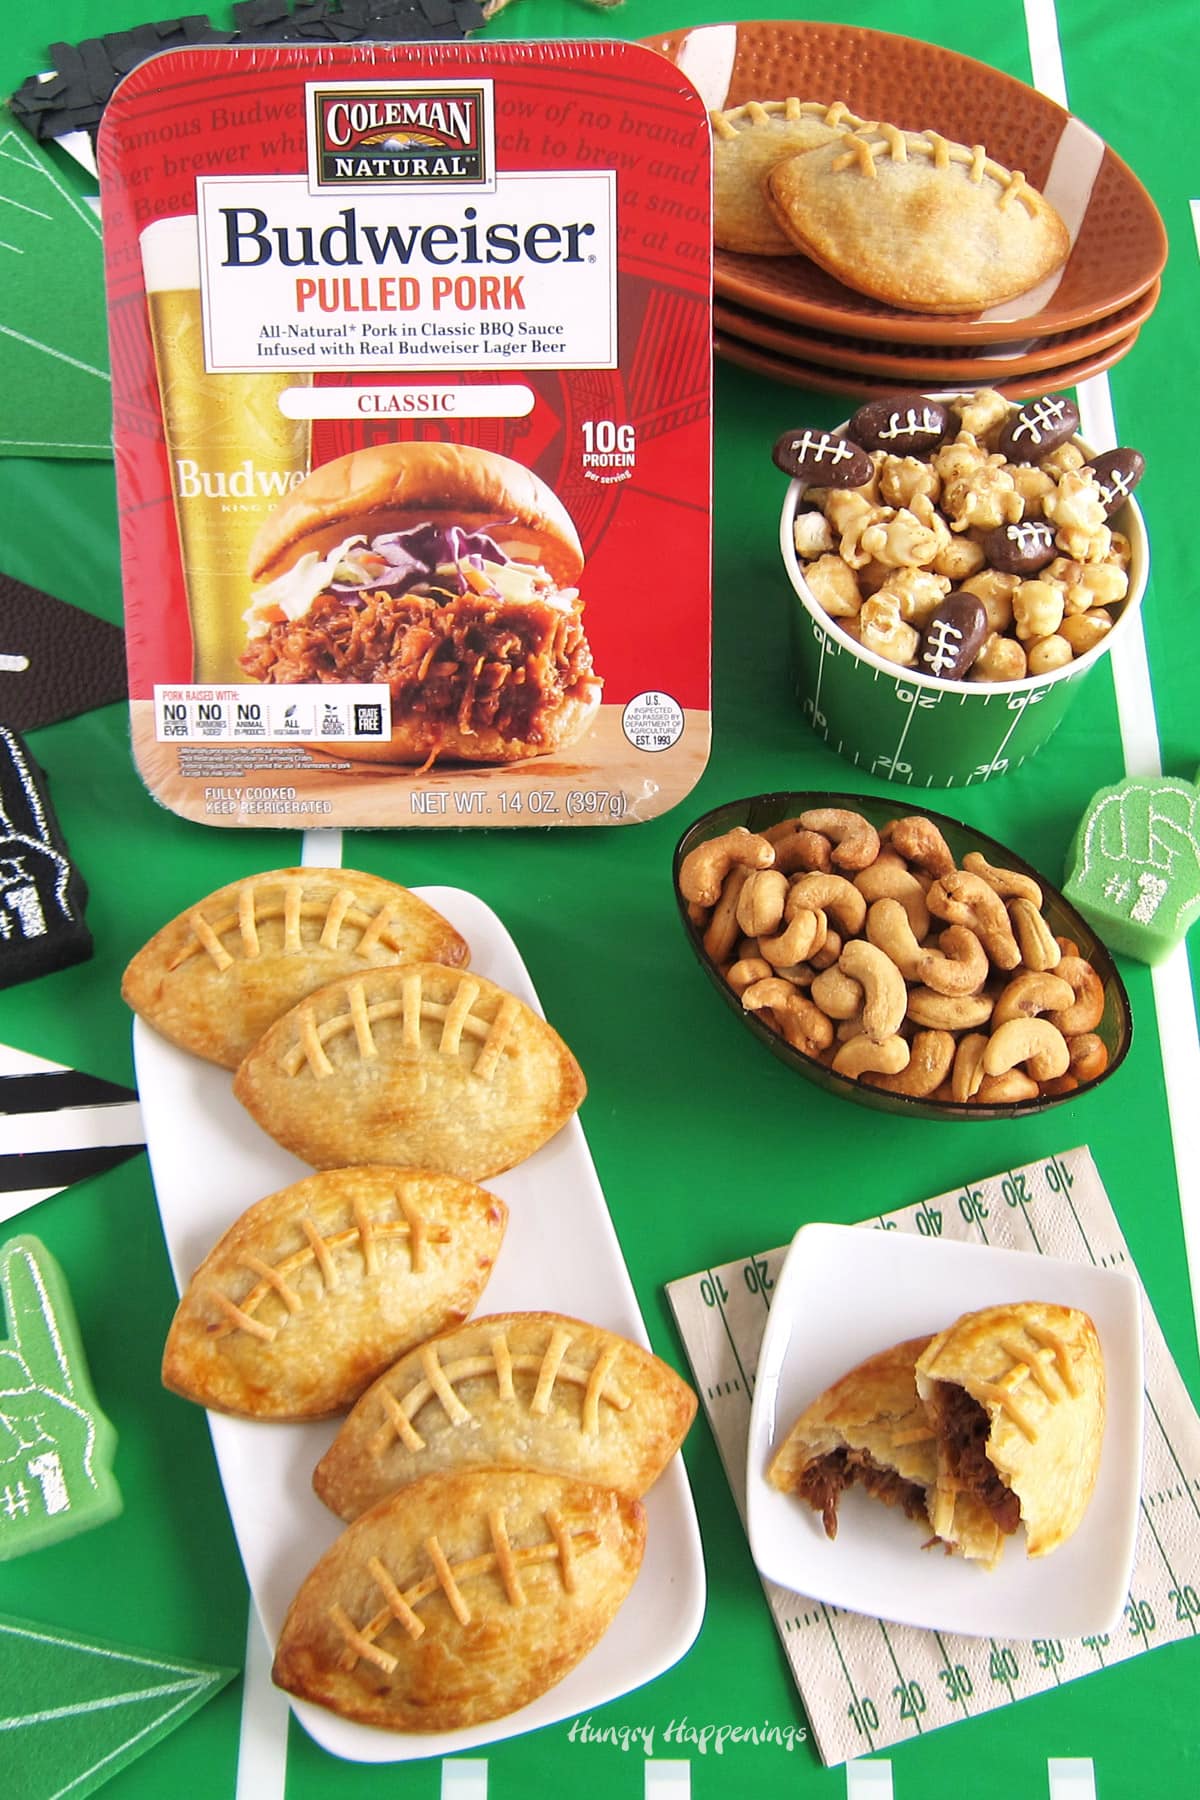 football appetizers - Budweiser Pulled Pork-filled football-shaped pastry pockets served with other game-day snacks